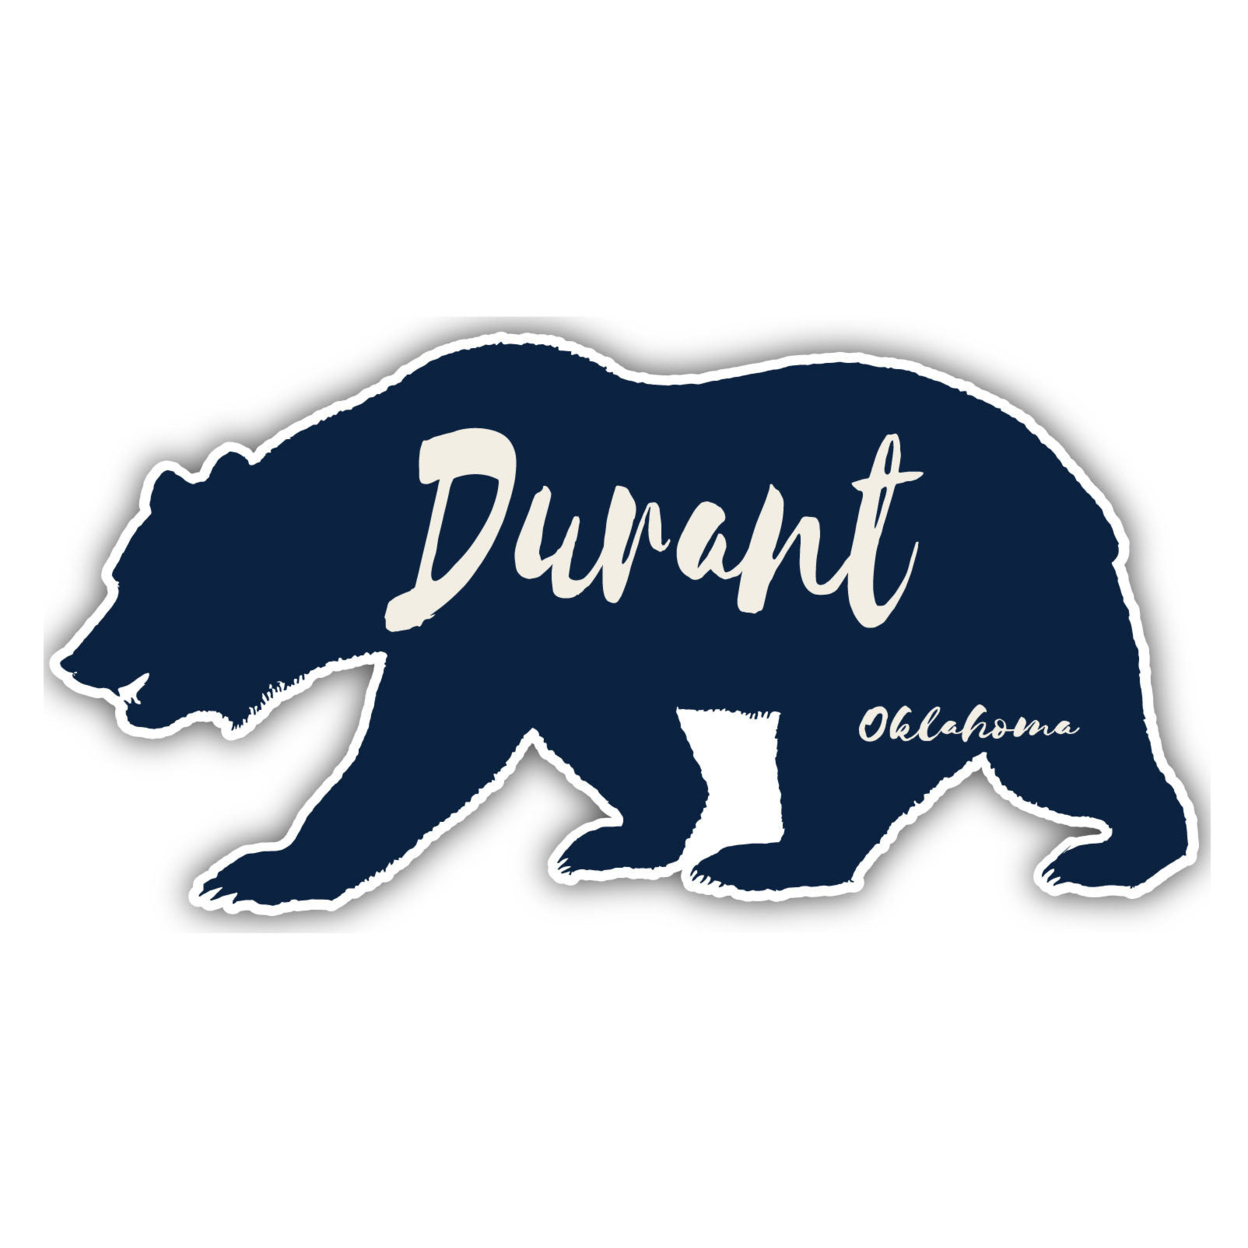 Durant Oklahoma Souvenir Decorative Stickers (Choose Theme And Size) - 4-Pack, 4-Inch, Bear